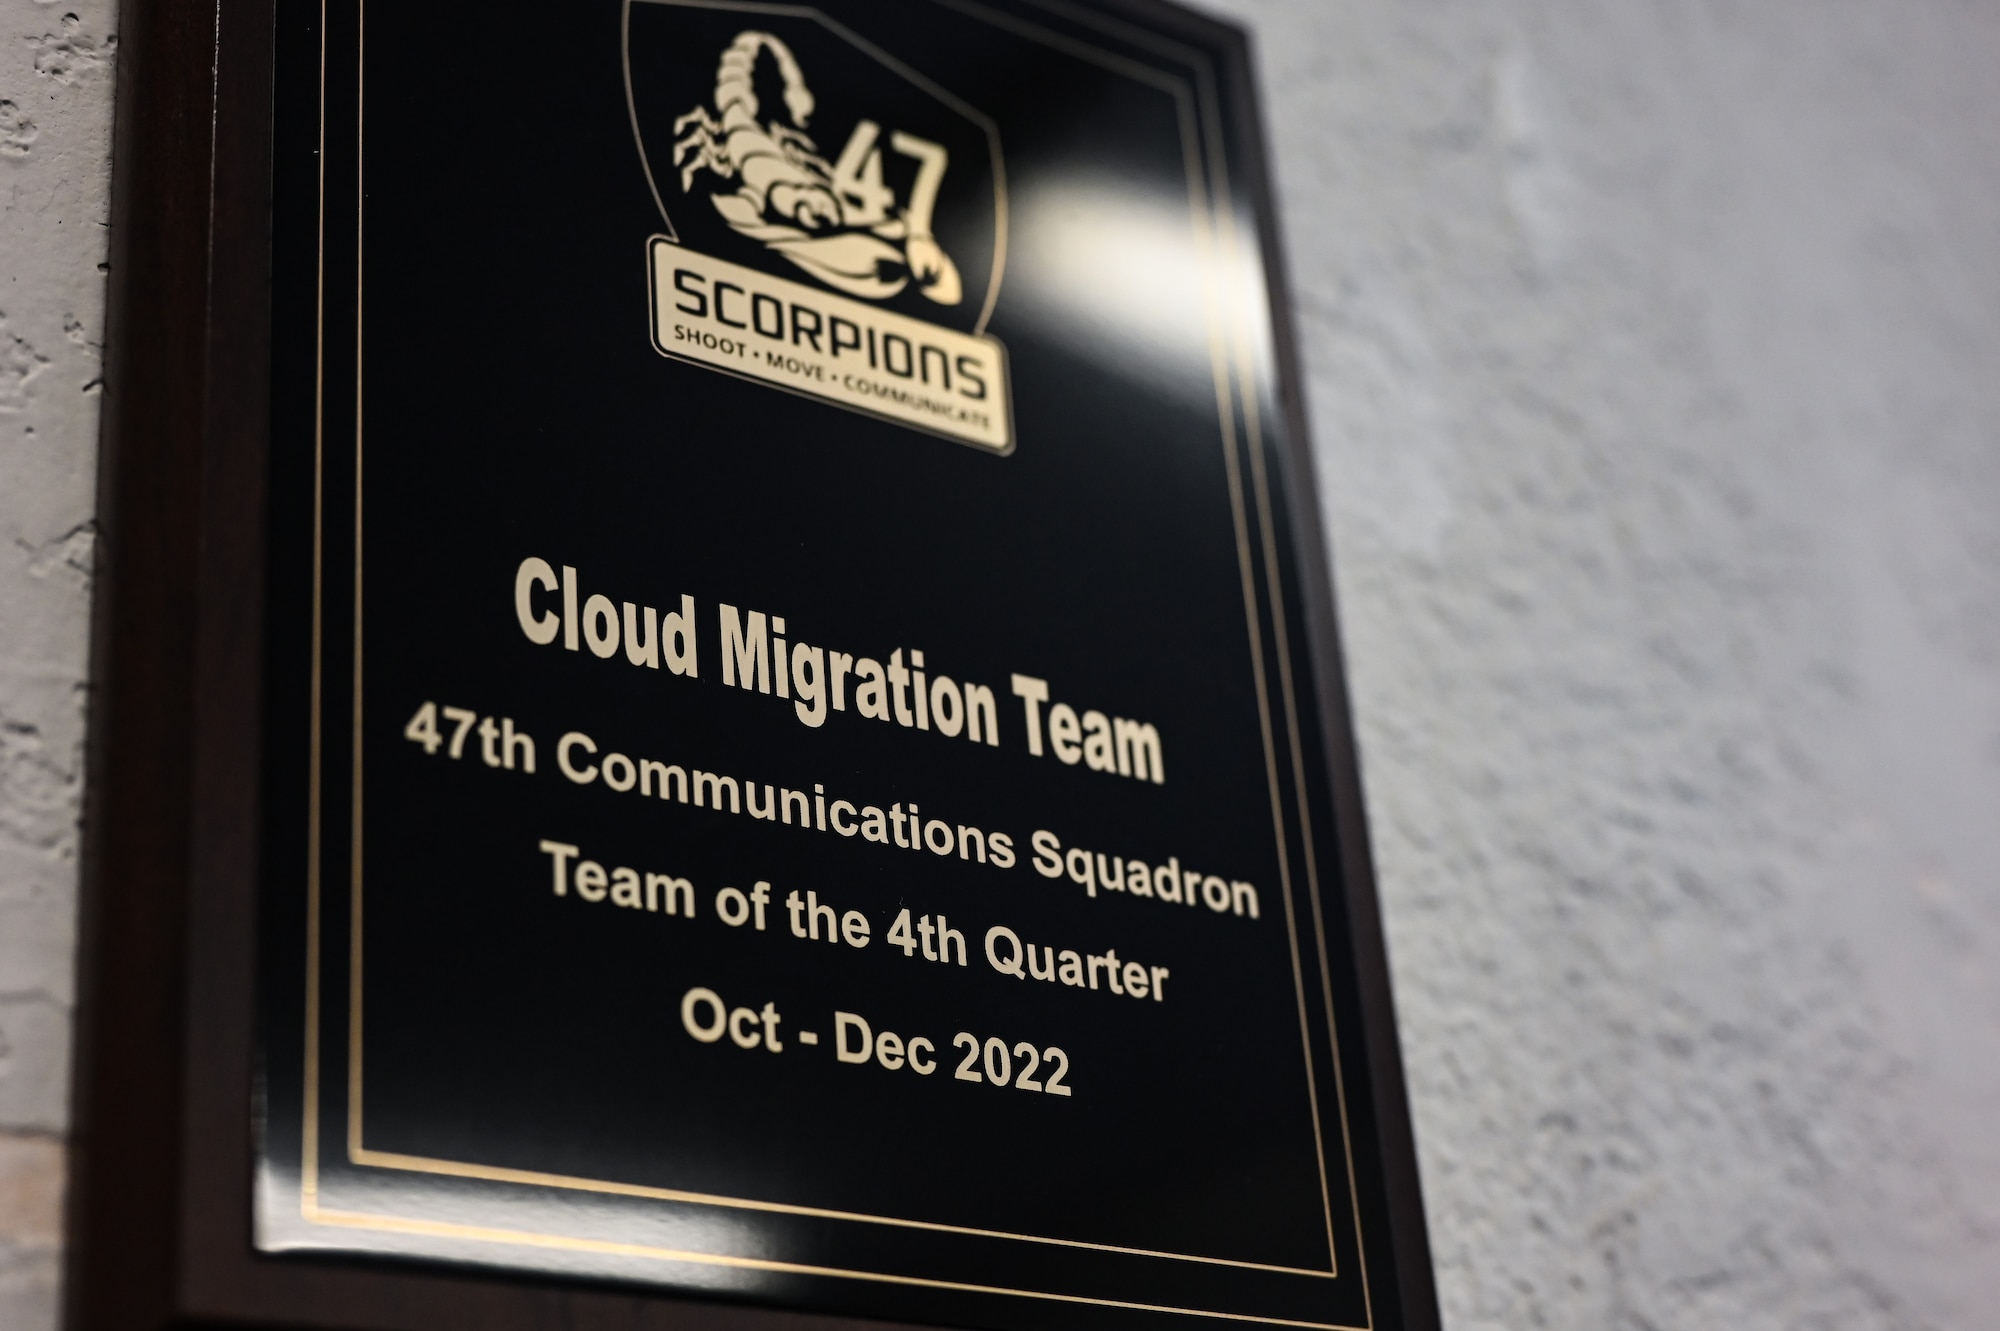 U.S. Air Force photo of a cloud migration team accolade awarded to the 47th Communications Squadron at Laughlin Air Force Base, Texas, on April 17, 2023. The records management program, which falls under the Communications squadron, aims to dispose of temporary value records promptly and systematically while adhering to legal and regulatory requirements. (U.S. Air Force photo by Airman 1st Class Keira Rossman)